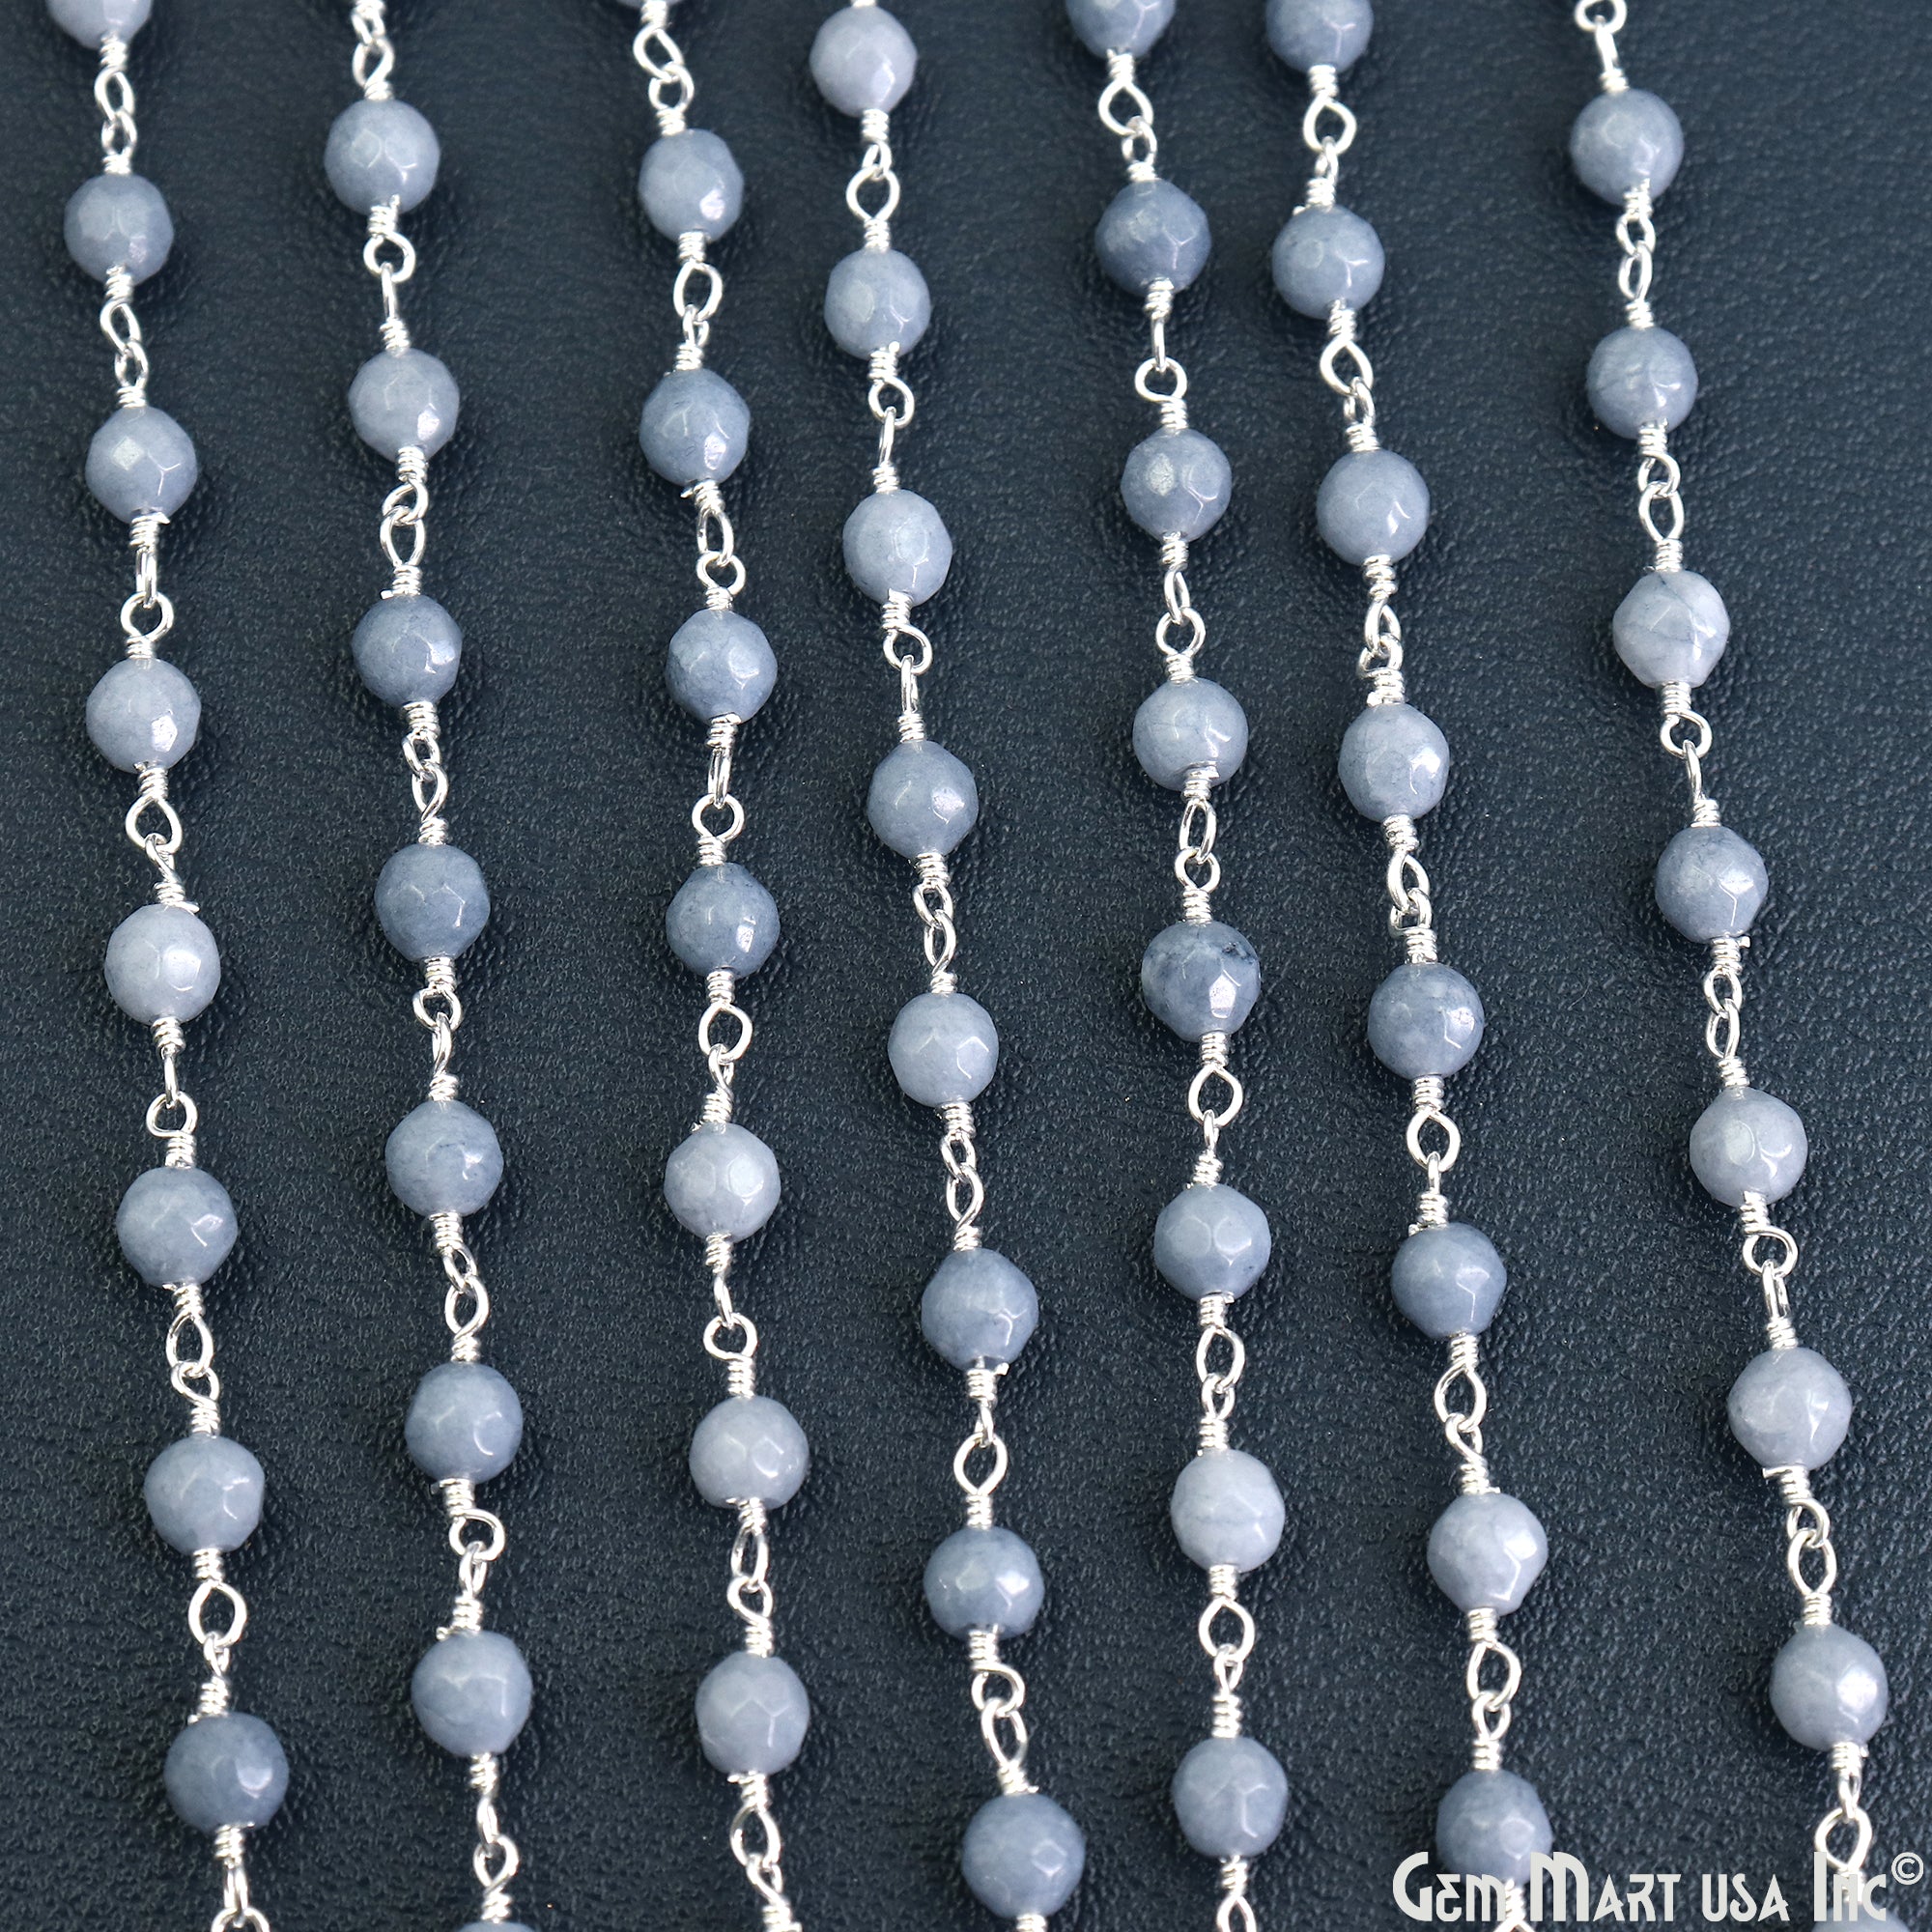 Blue Lace Agate Jade Faceted Beads 4mm Silver Wire Wrapped Rosary Chain